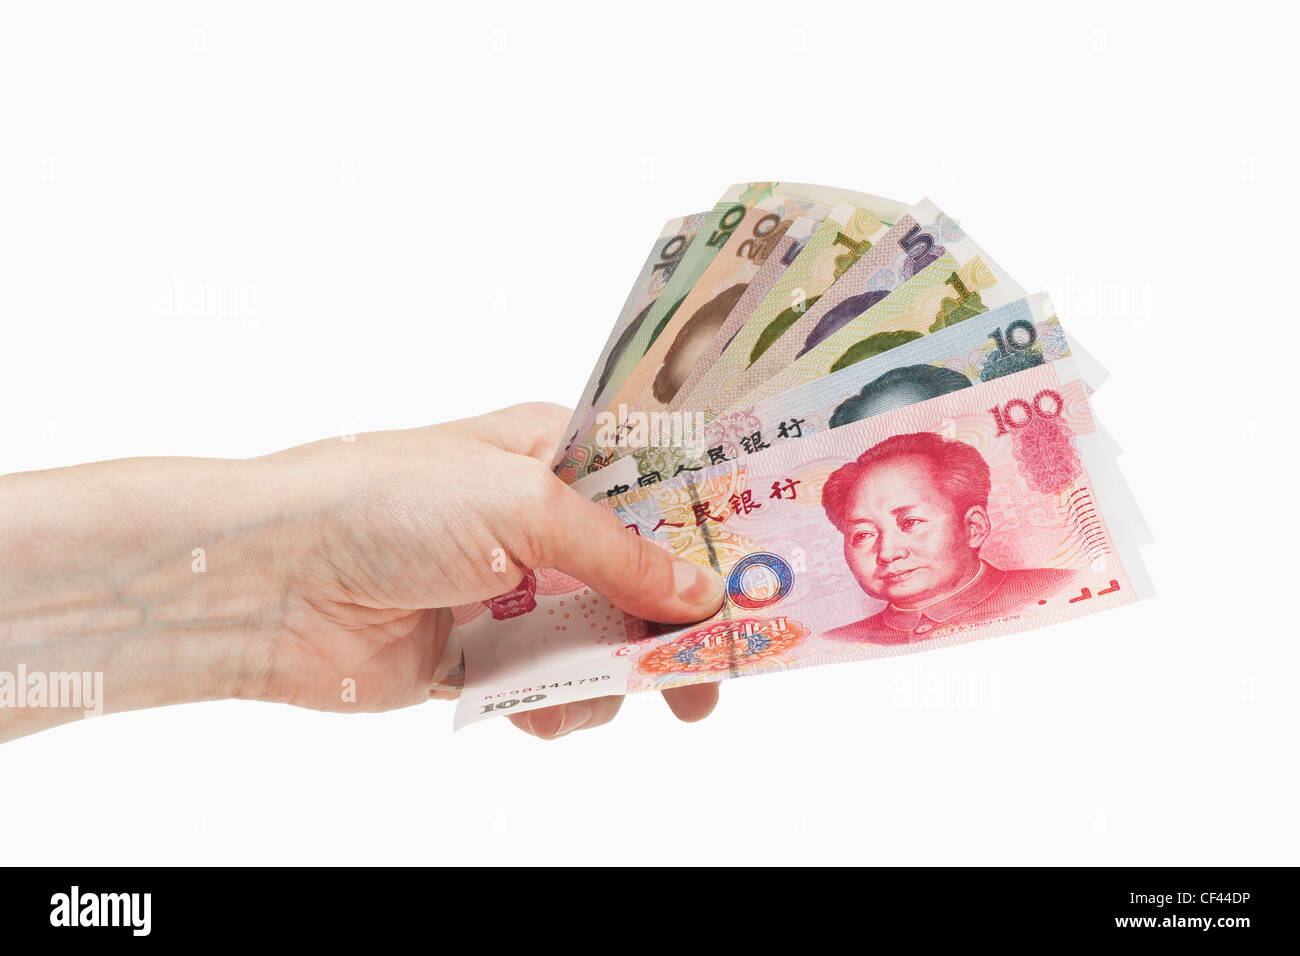 Stack of Chinese Yuan Money in Red Envelope Stock Image - Image of